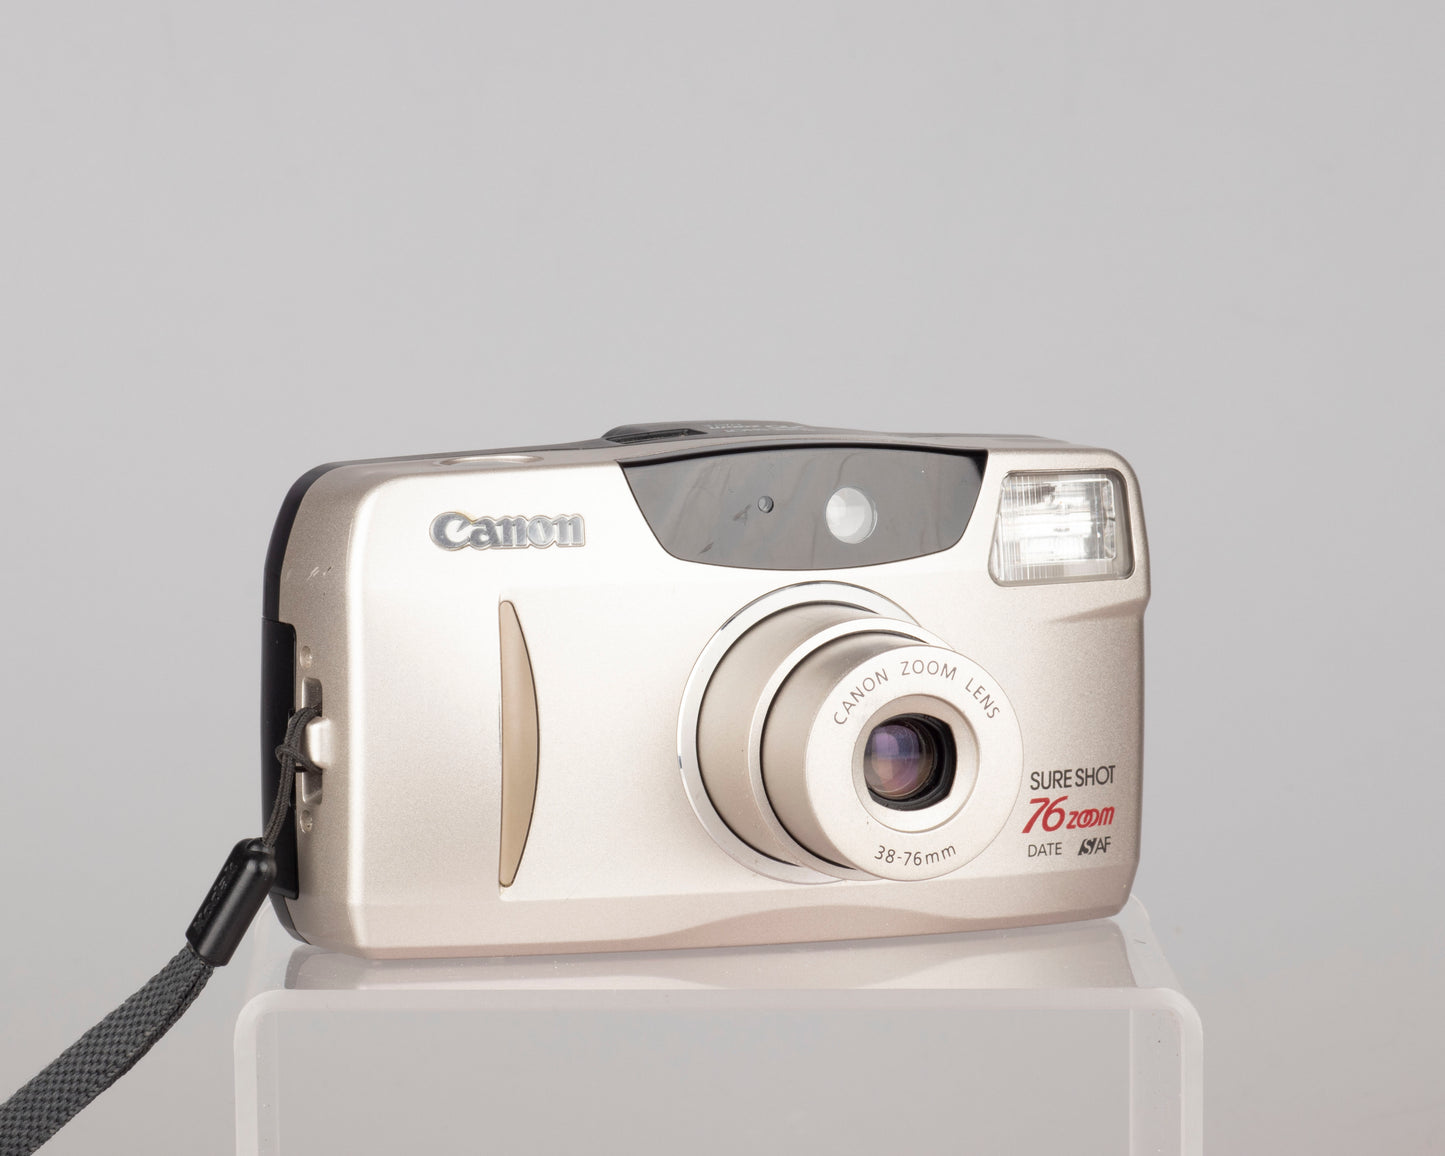 The Canon Sure Shot 76 Zoom Date is a quality 35mm point-and-shoot from circa 2000